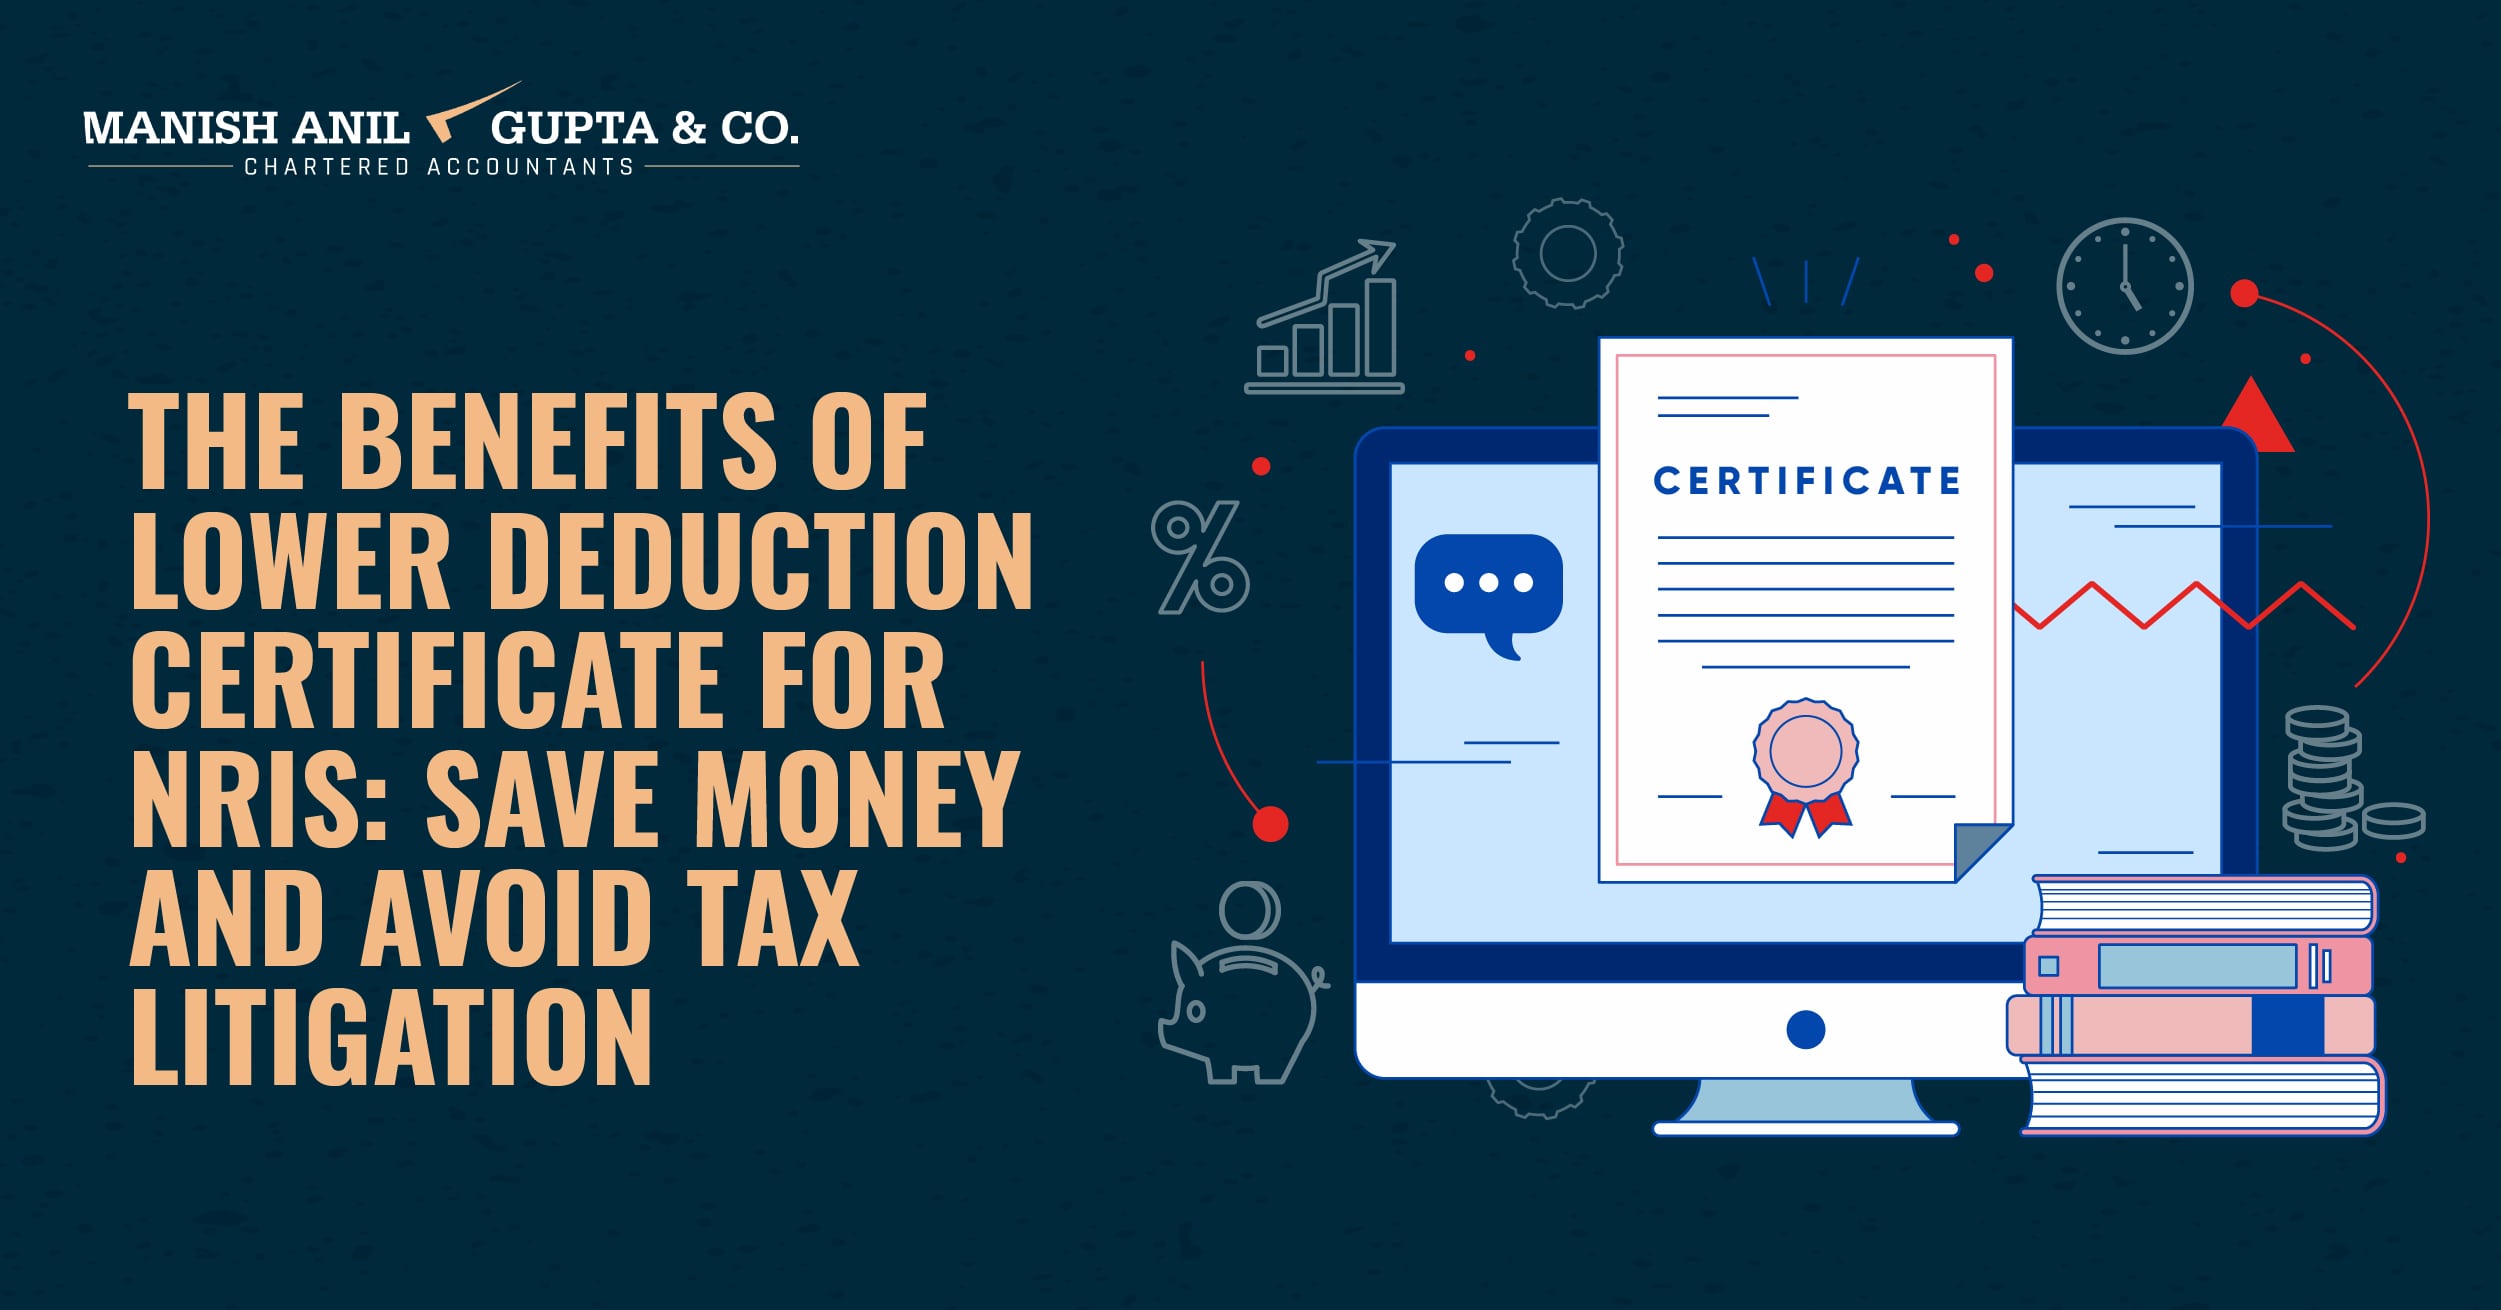 <Benefits of Lower Deduction Certificate for NRIs: Save Money and Avoid Tax Litigation